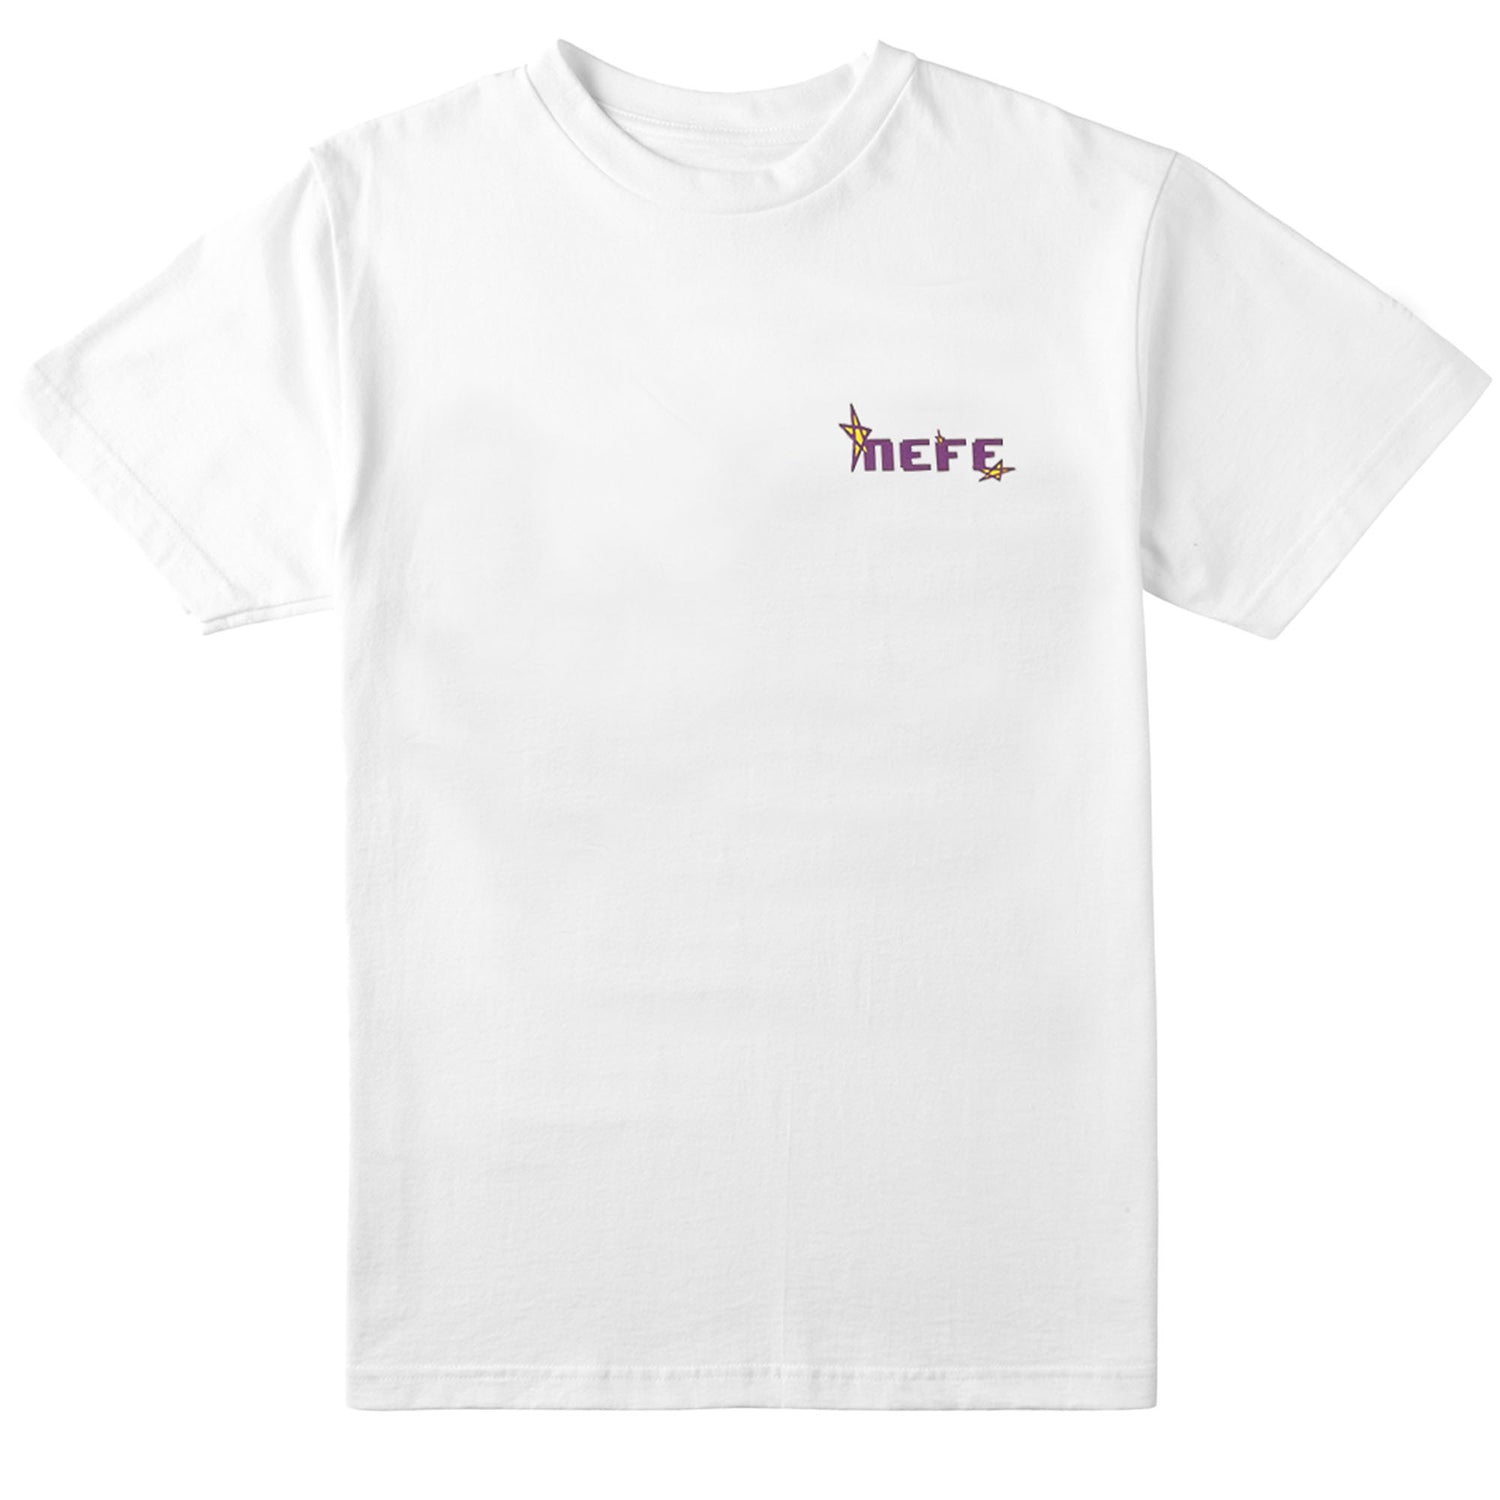 SAFE TRAVELS TEE - WHITE